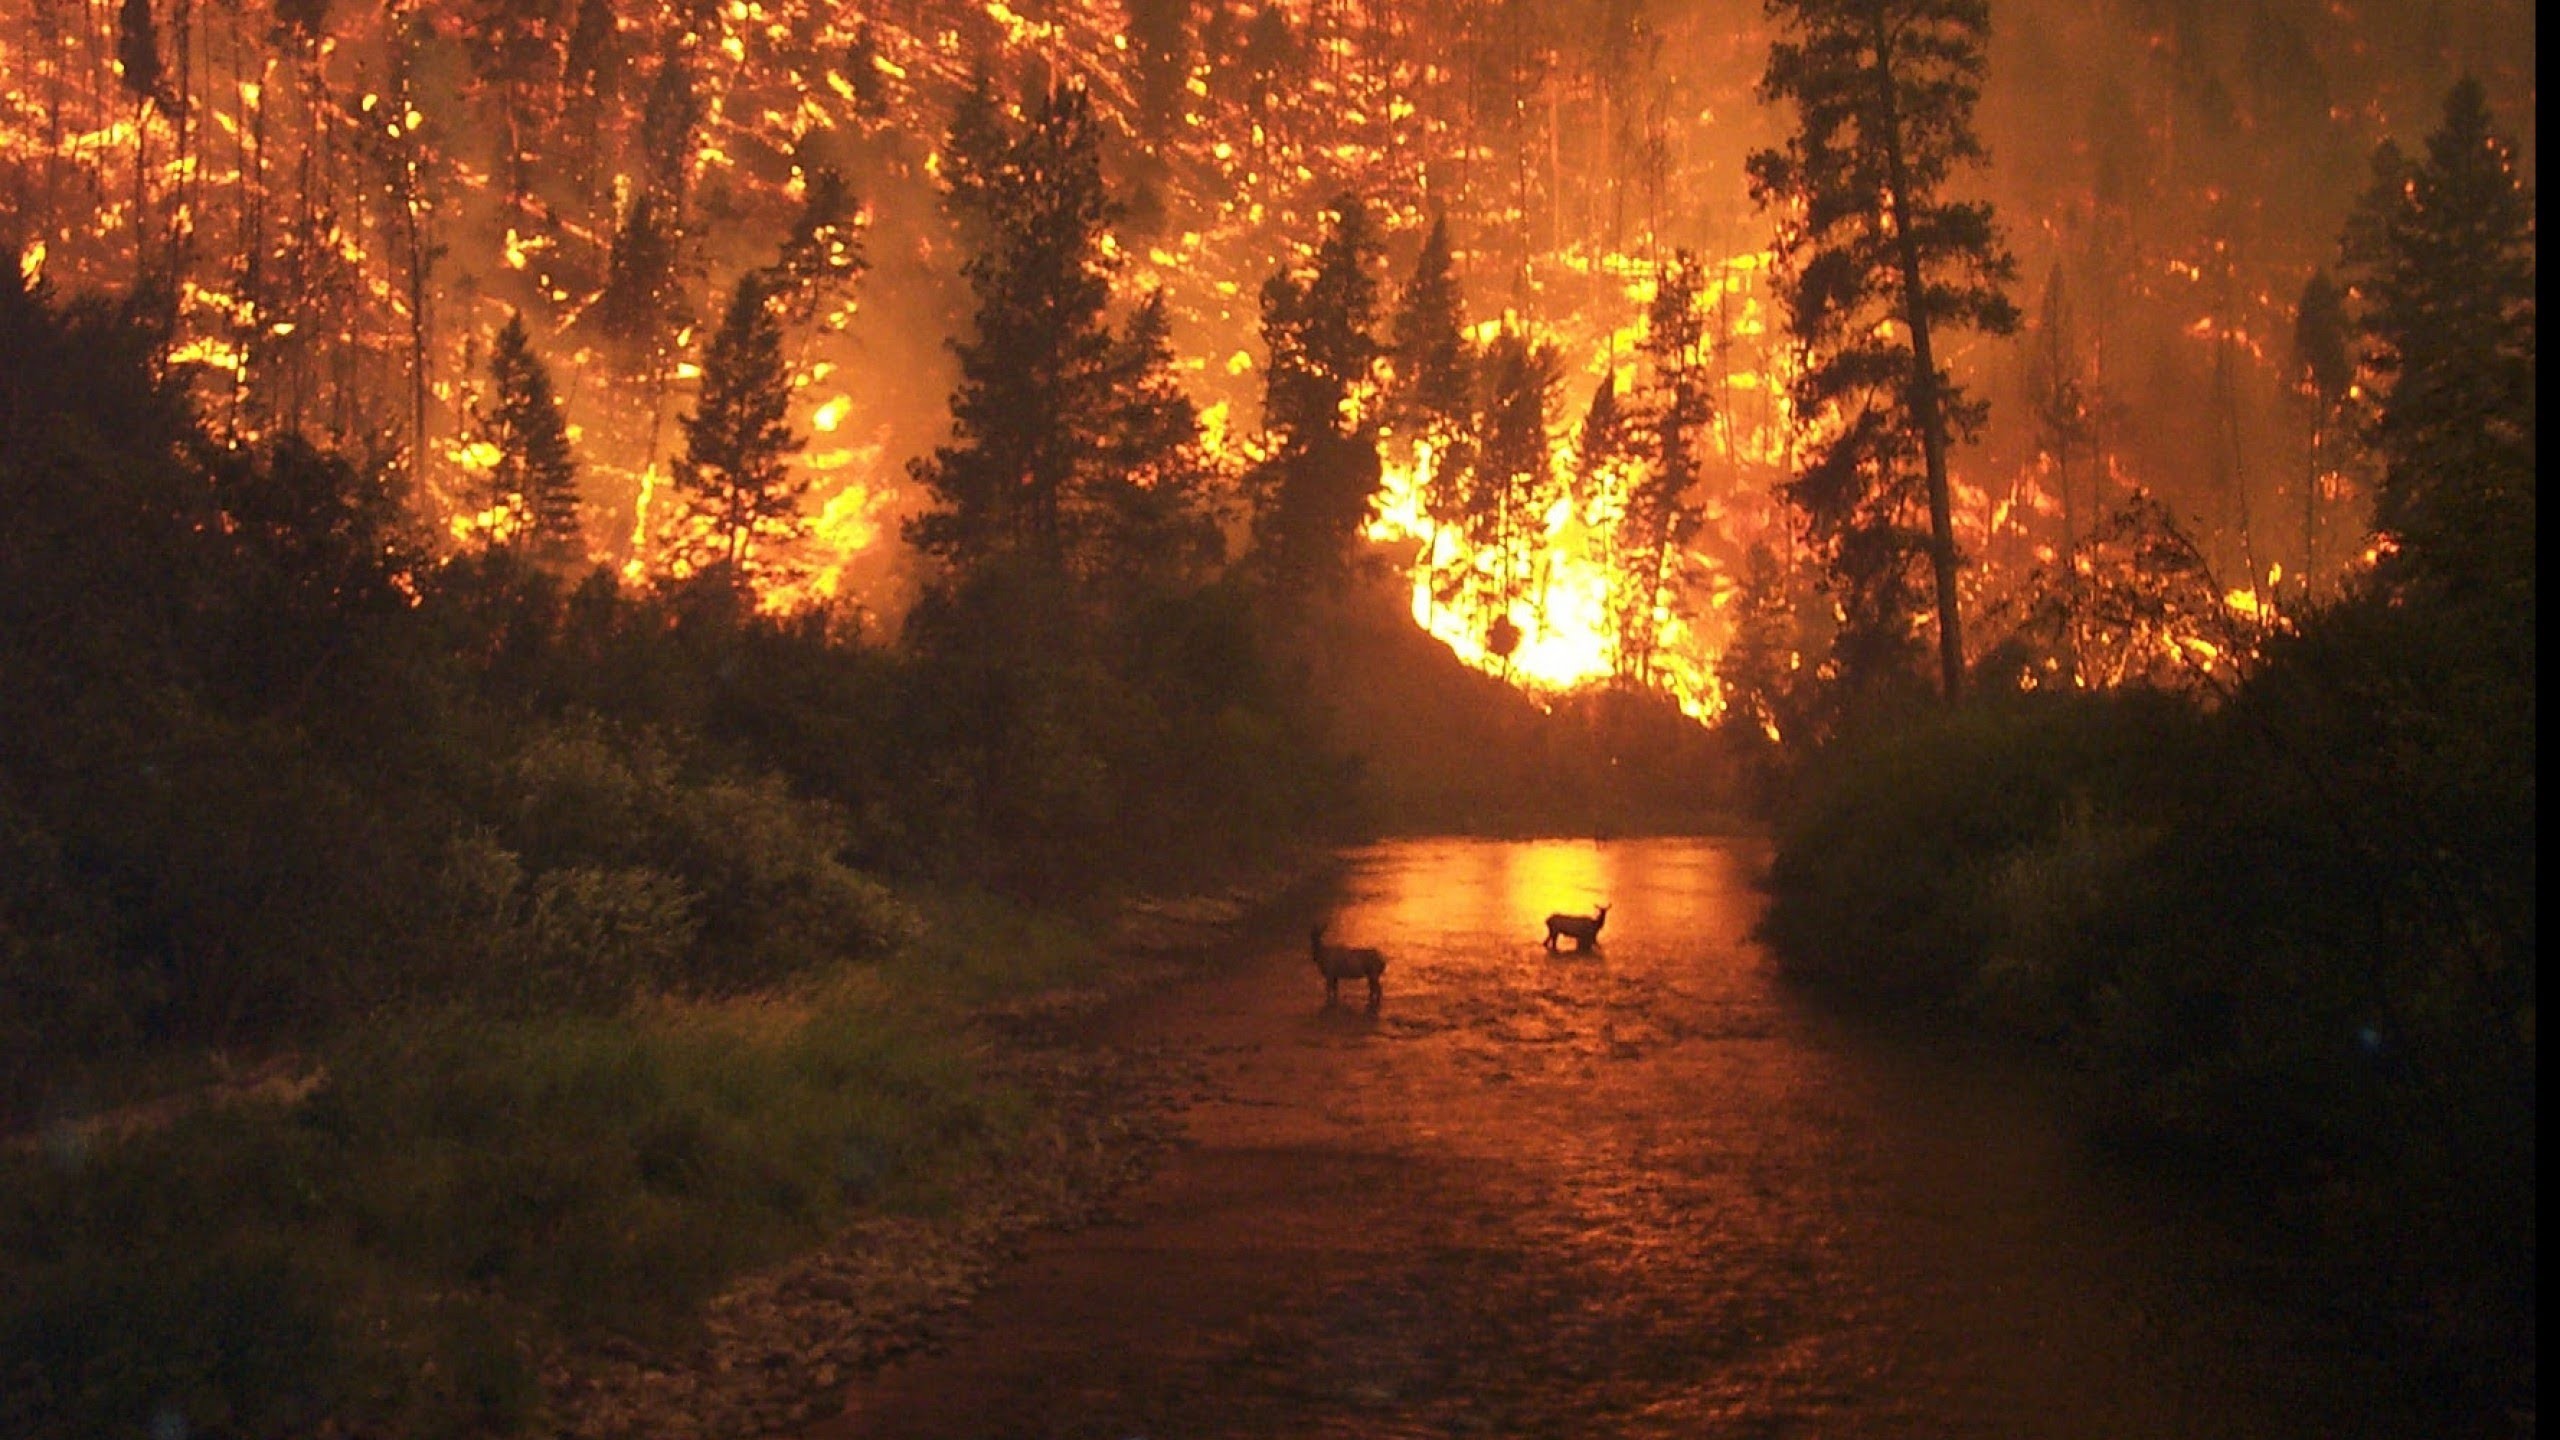 2560x1440 Documentary on Forests Under Fire Wildfire - HD 1080p